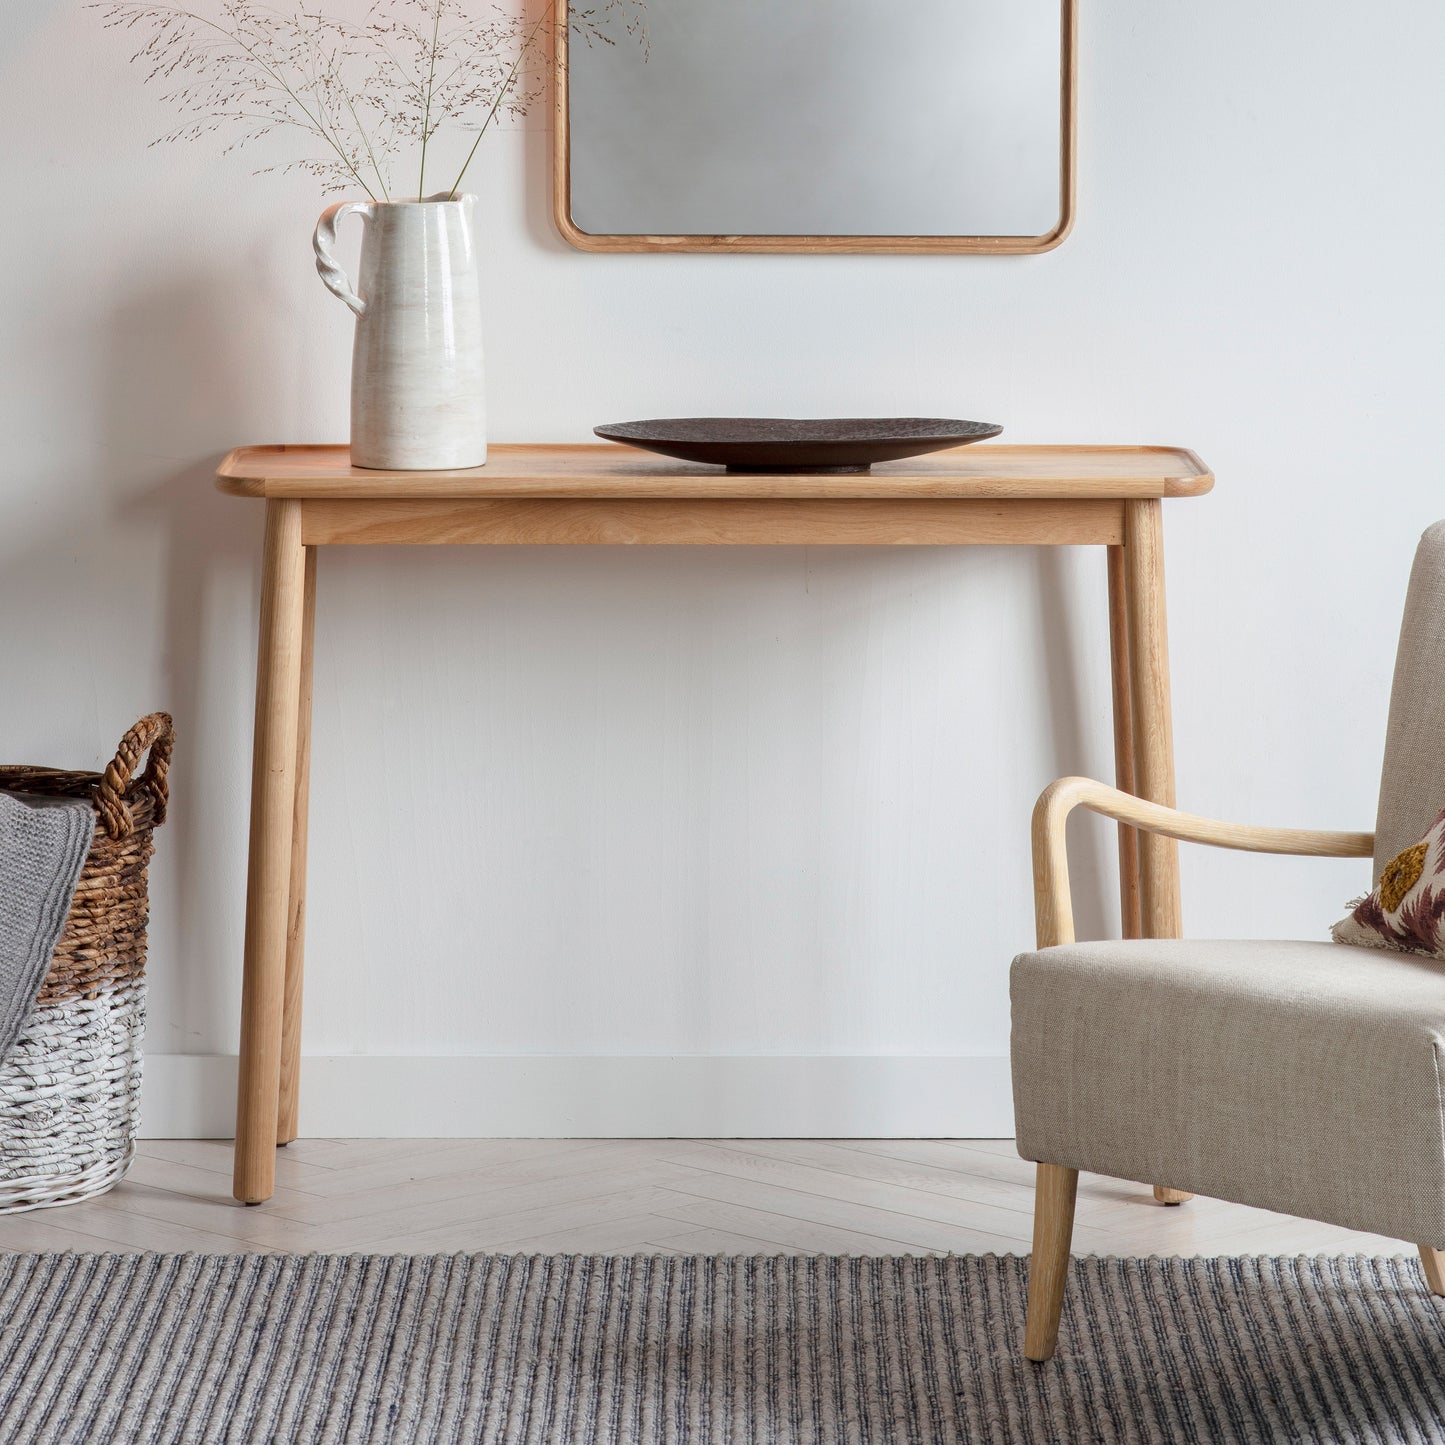 Interior decor, Home furniture: Wembury Console Table with mirror and chair from Kikiathome.co.uk.